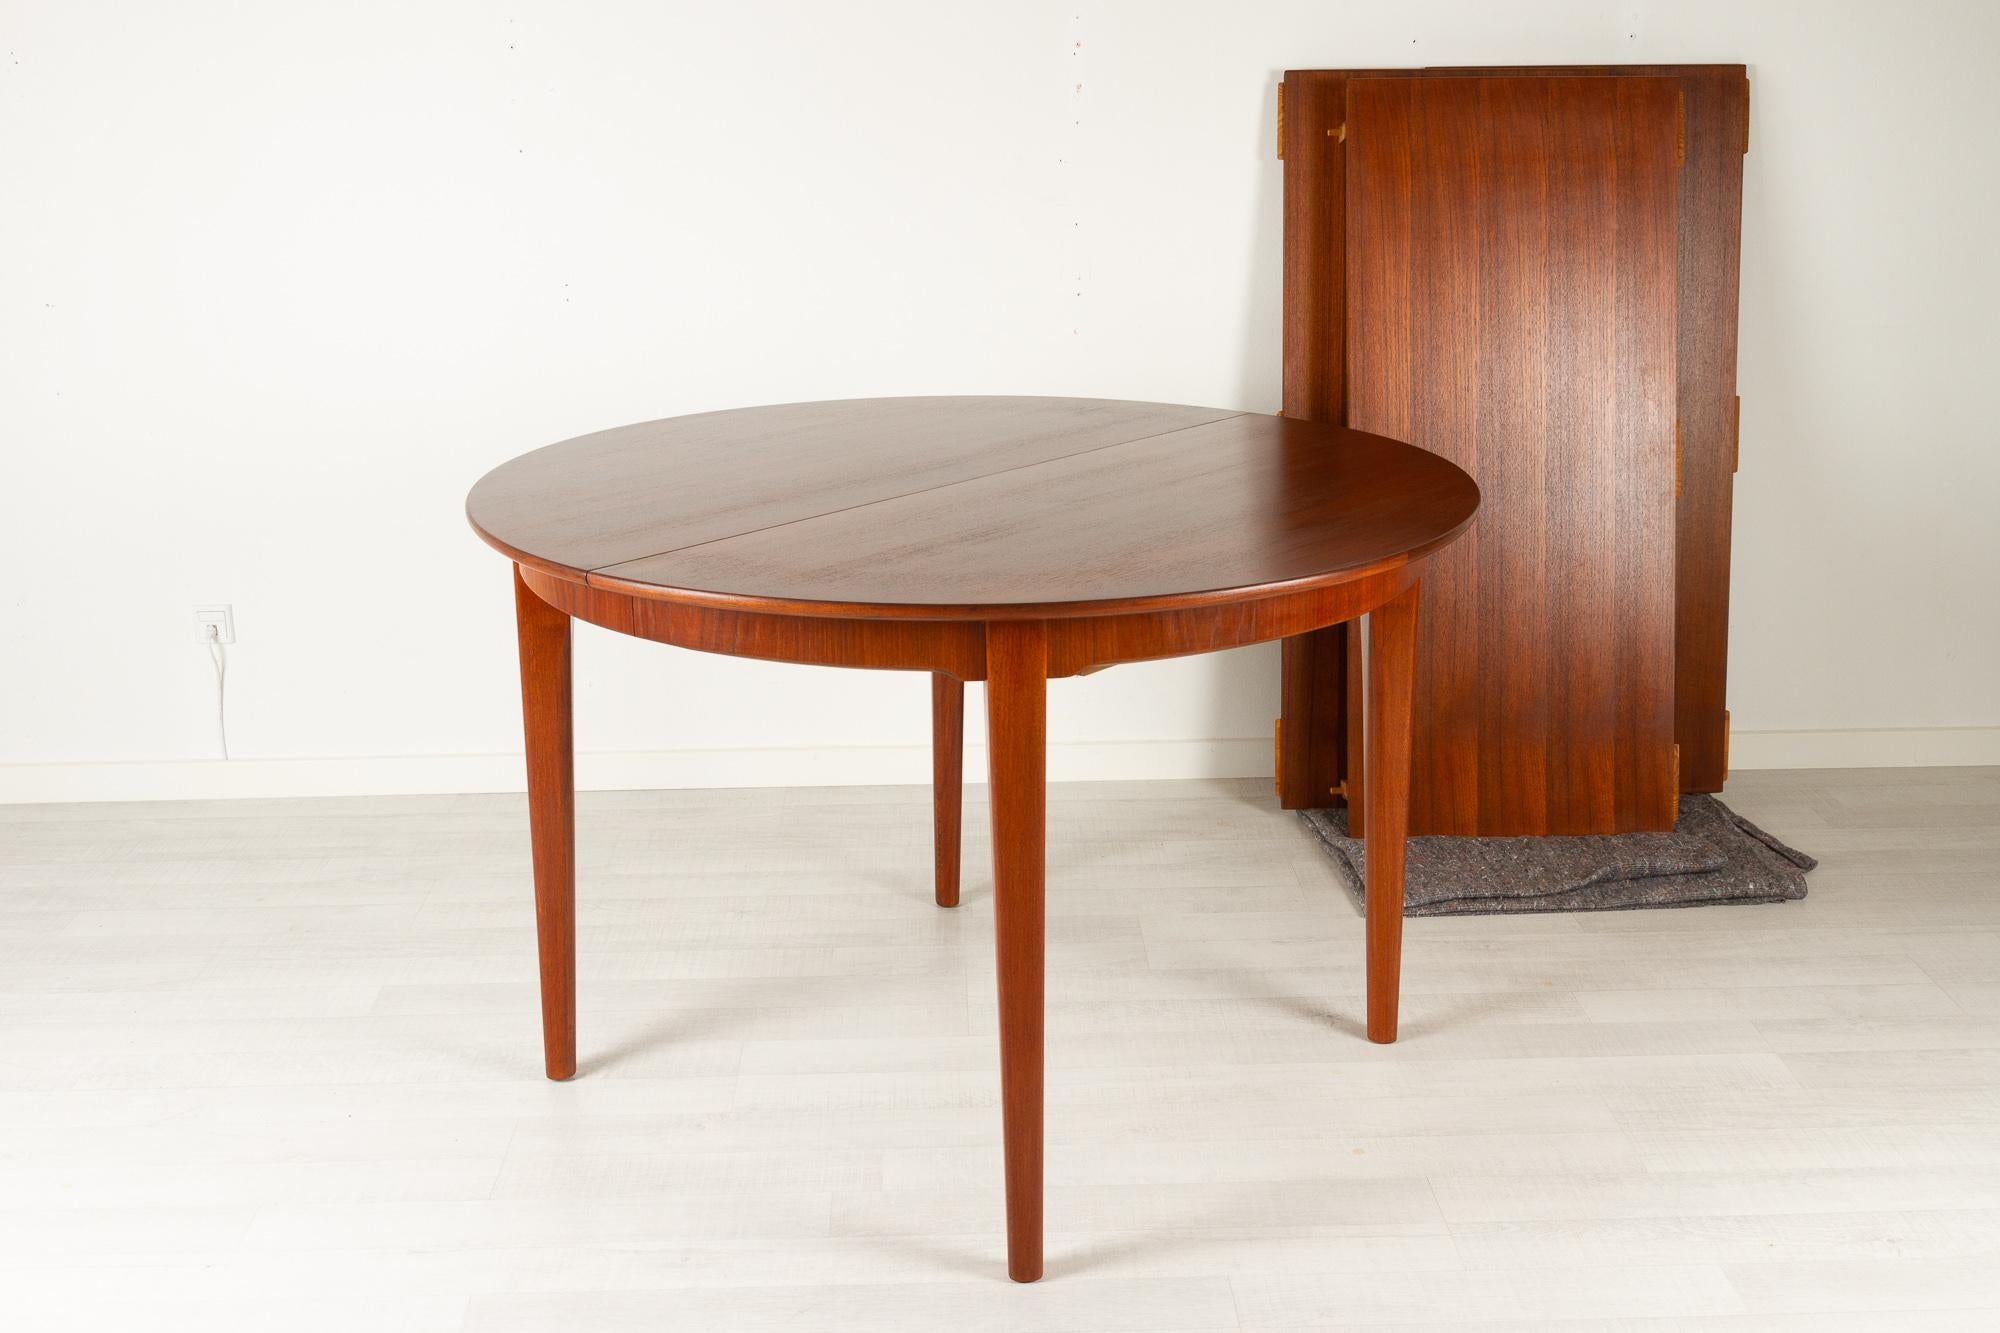 Large Vintage Danish teak dining table by Sorø Stolefabrik, 1960s.
Round Danish Mid-Century Modern extendable dining table with three extension leaves.
The table has a diameter of 115 cm and can be extended up to maximum 265 cm.
All extension